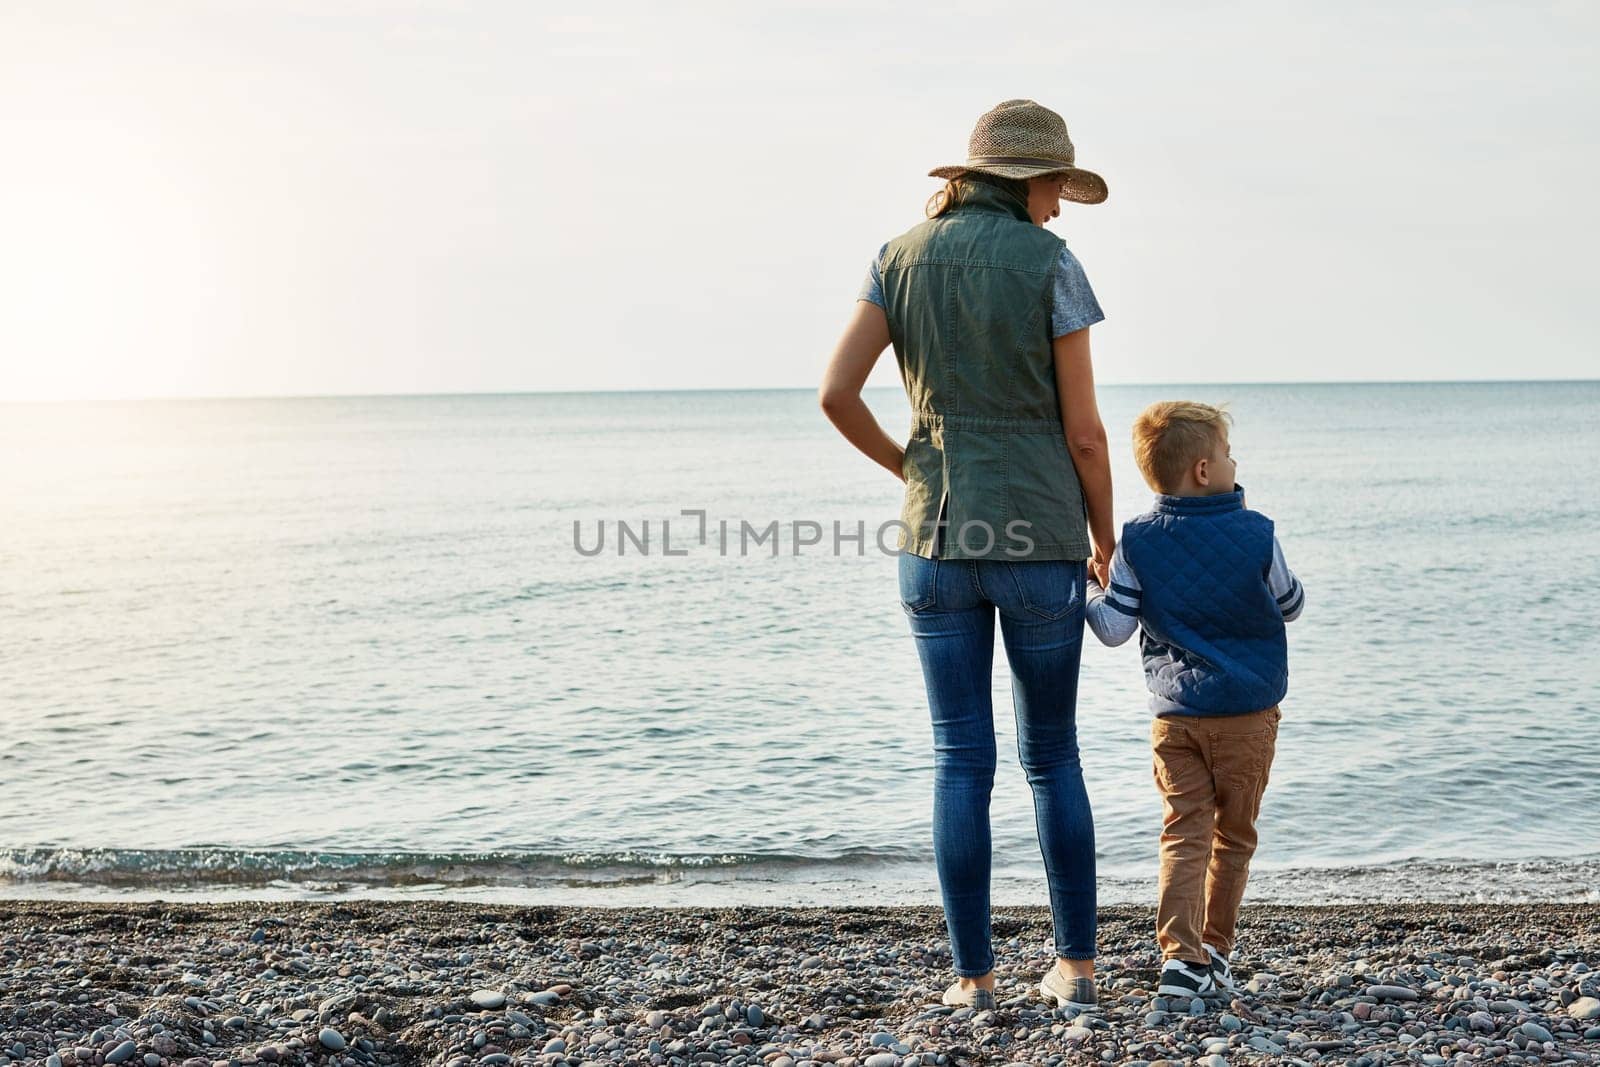 Admiring the beauty of nature. a young woman and her son enjoying a walk by the water